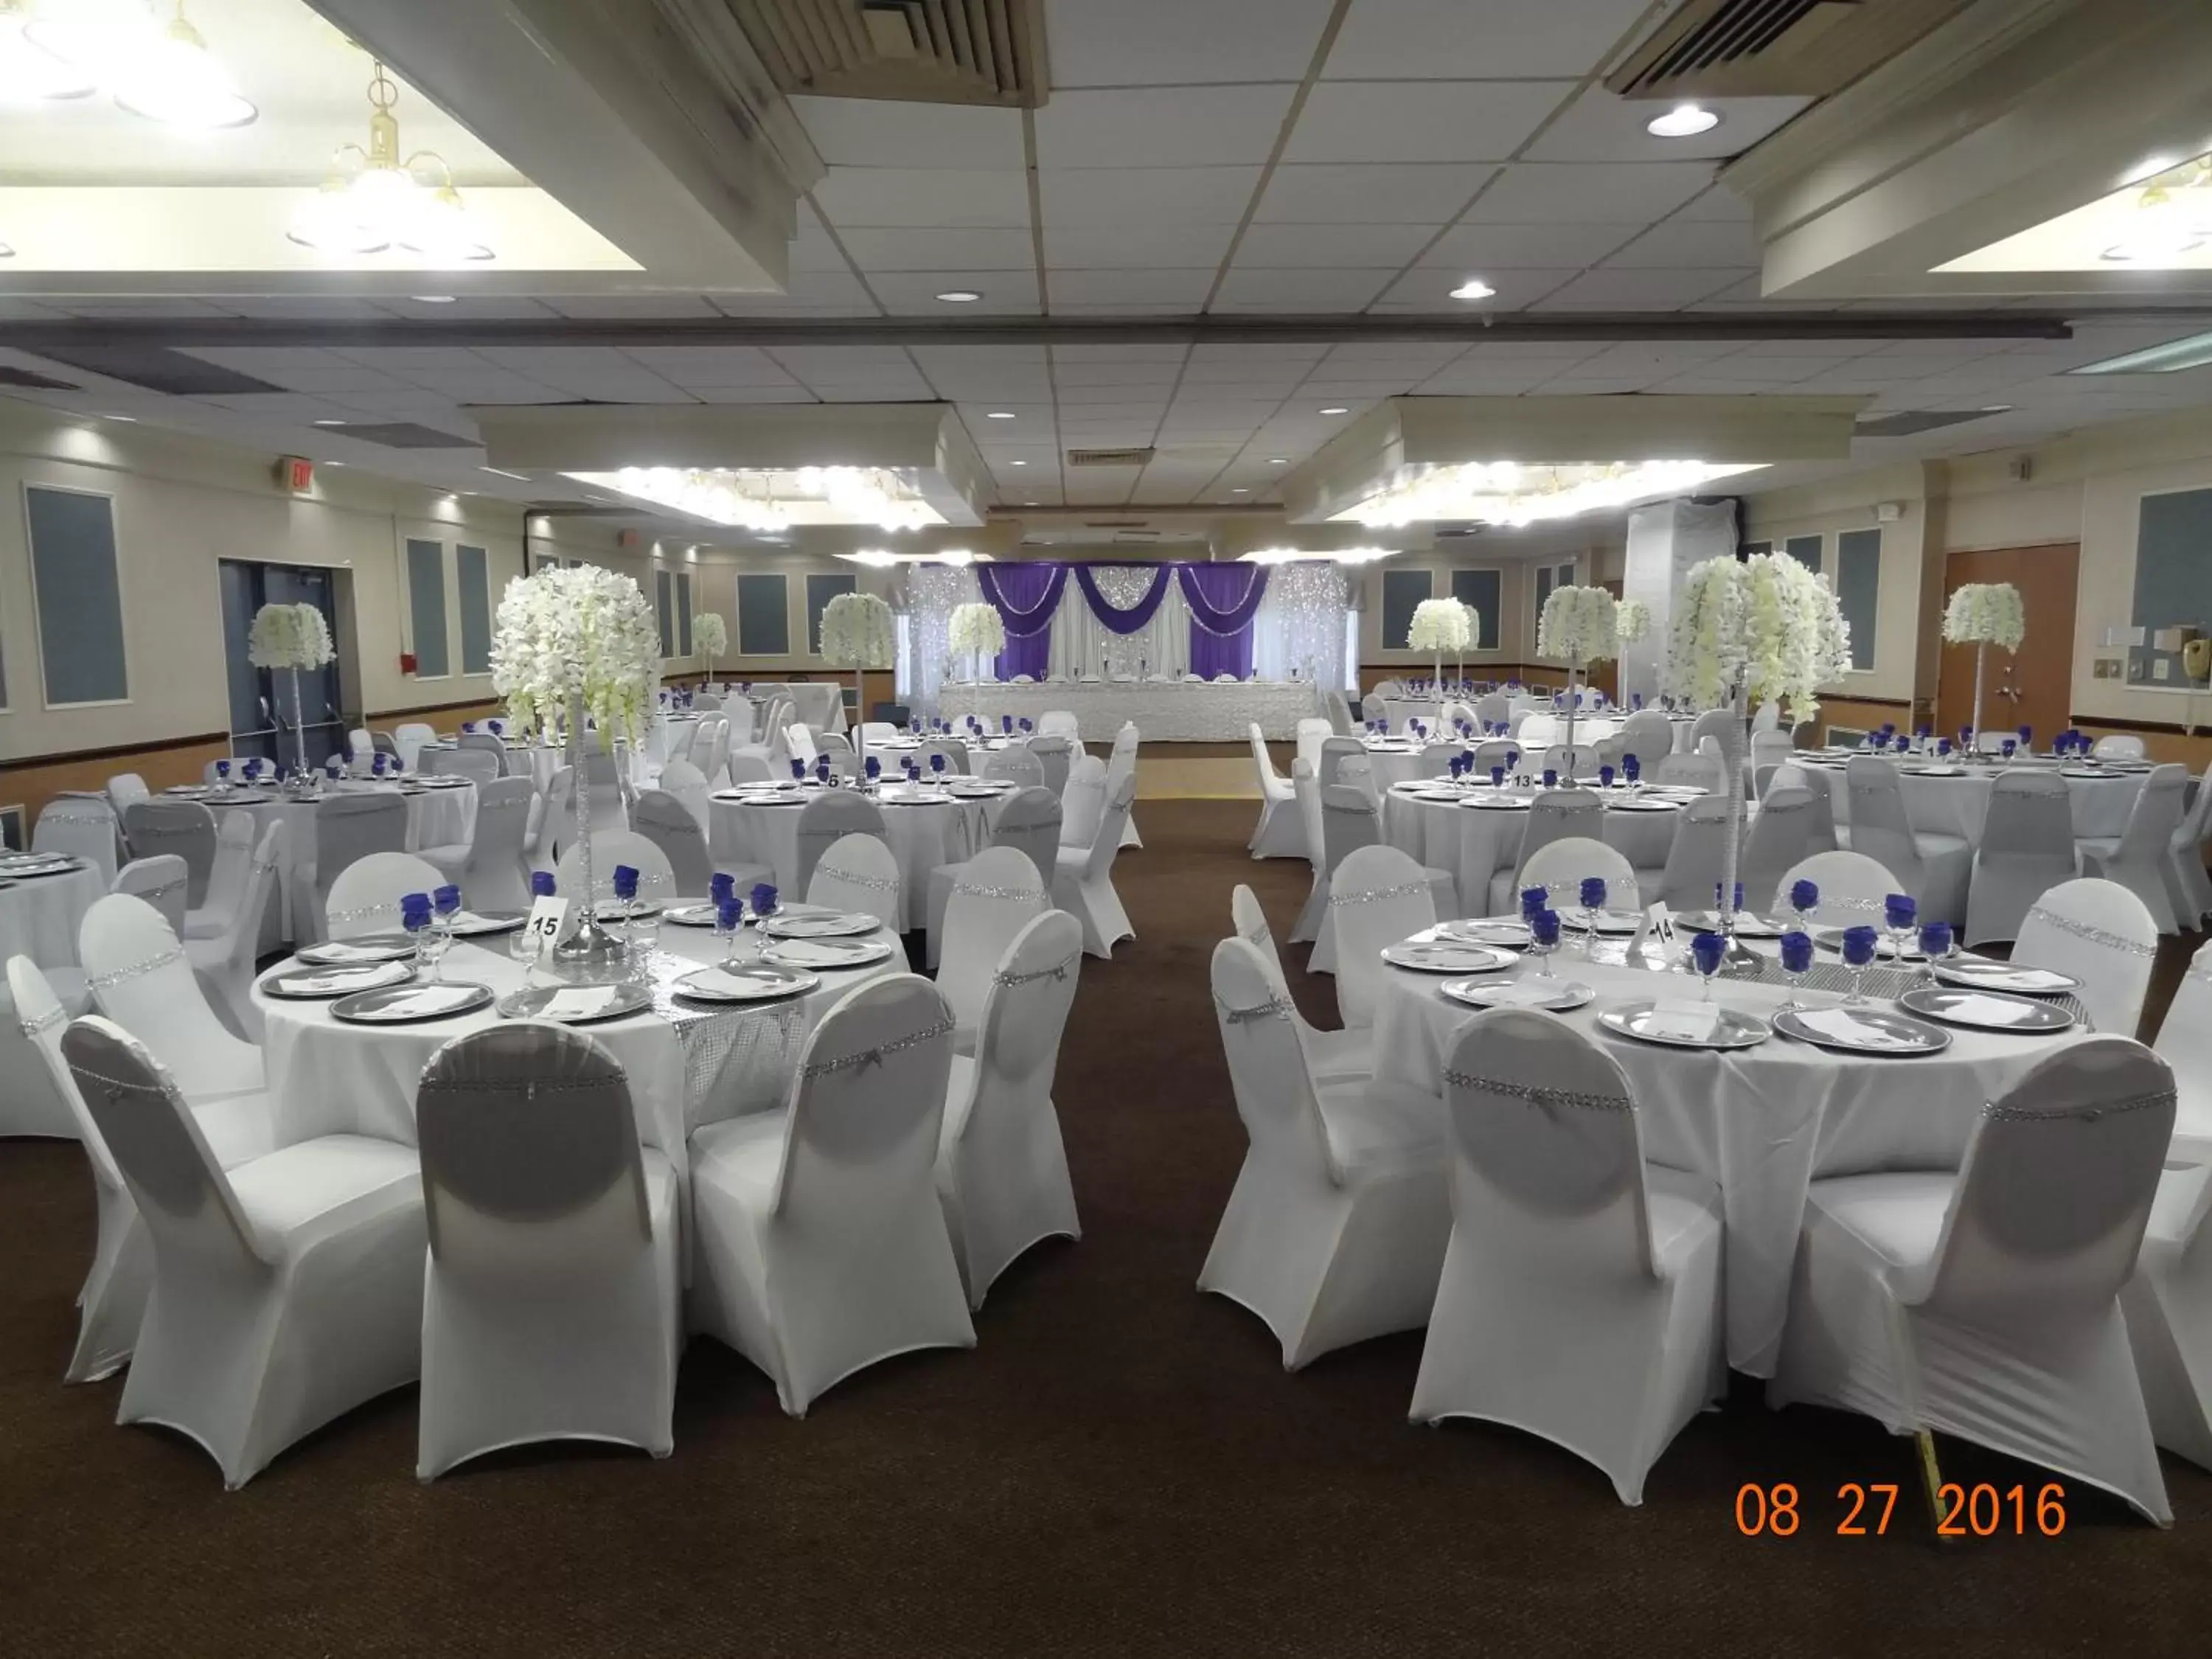 Banquet/Function facilities, Banquet Facilities in Days Inn by Wyndham Columbus East Airport